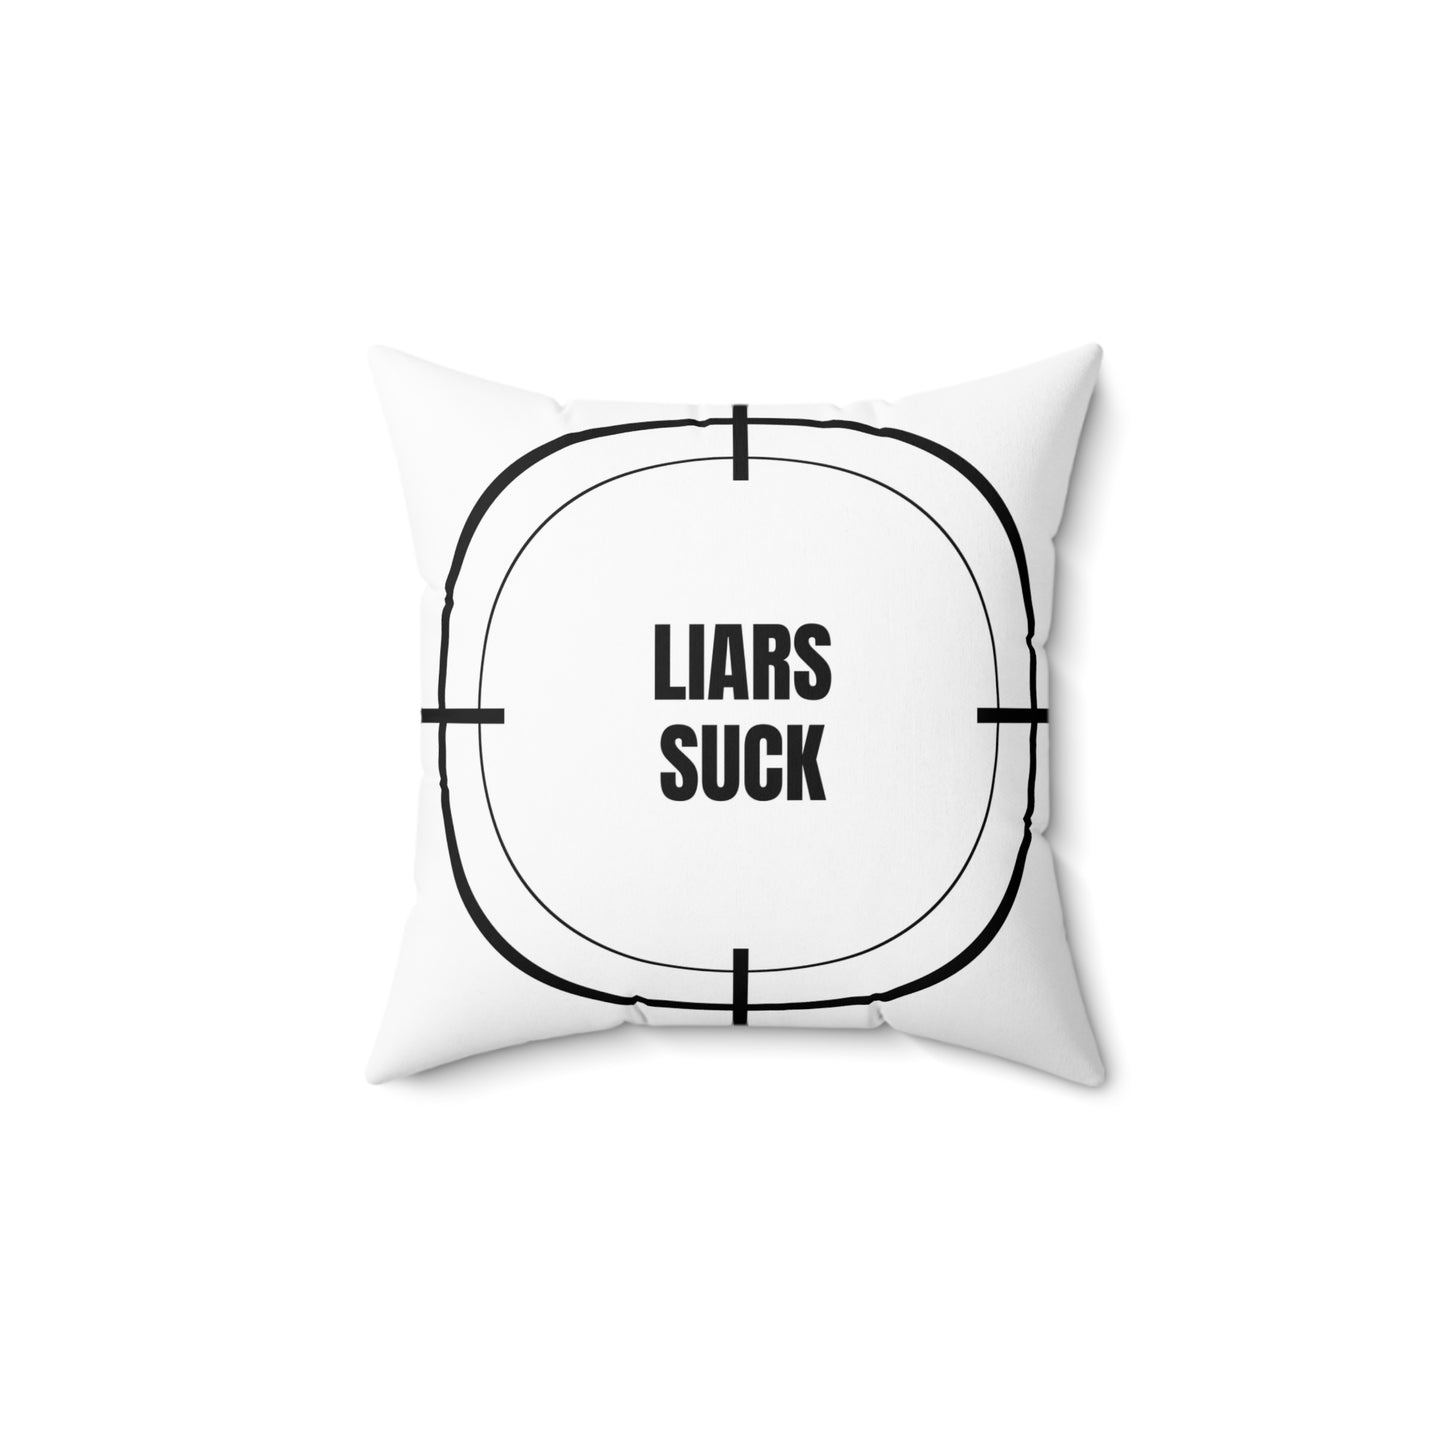 Liars Suck | Emotional Release Pillow